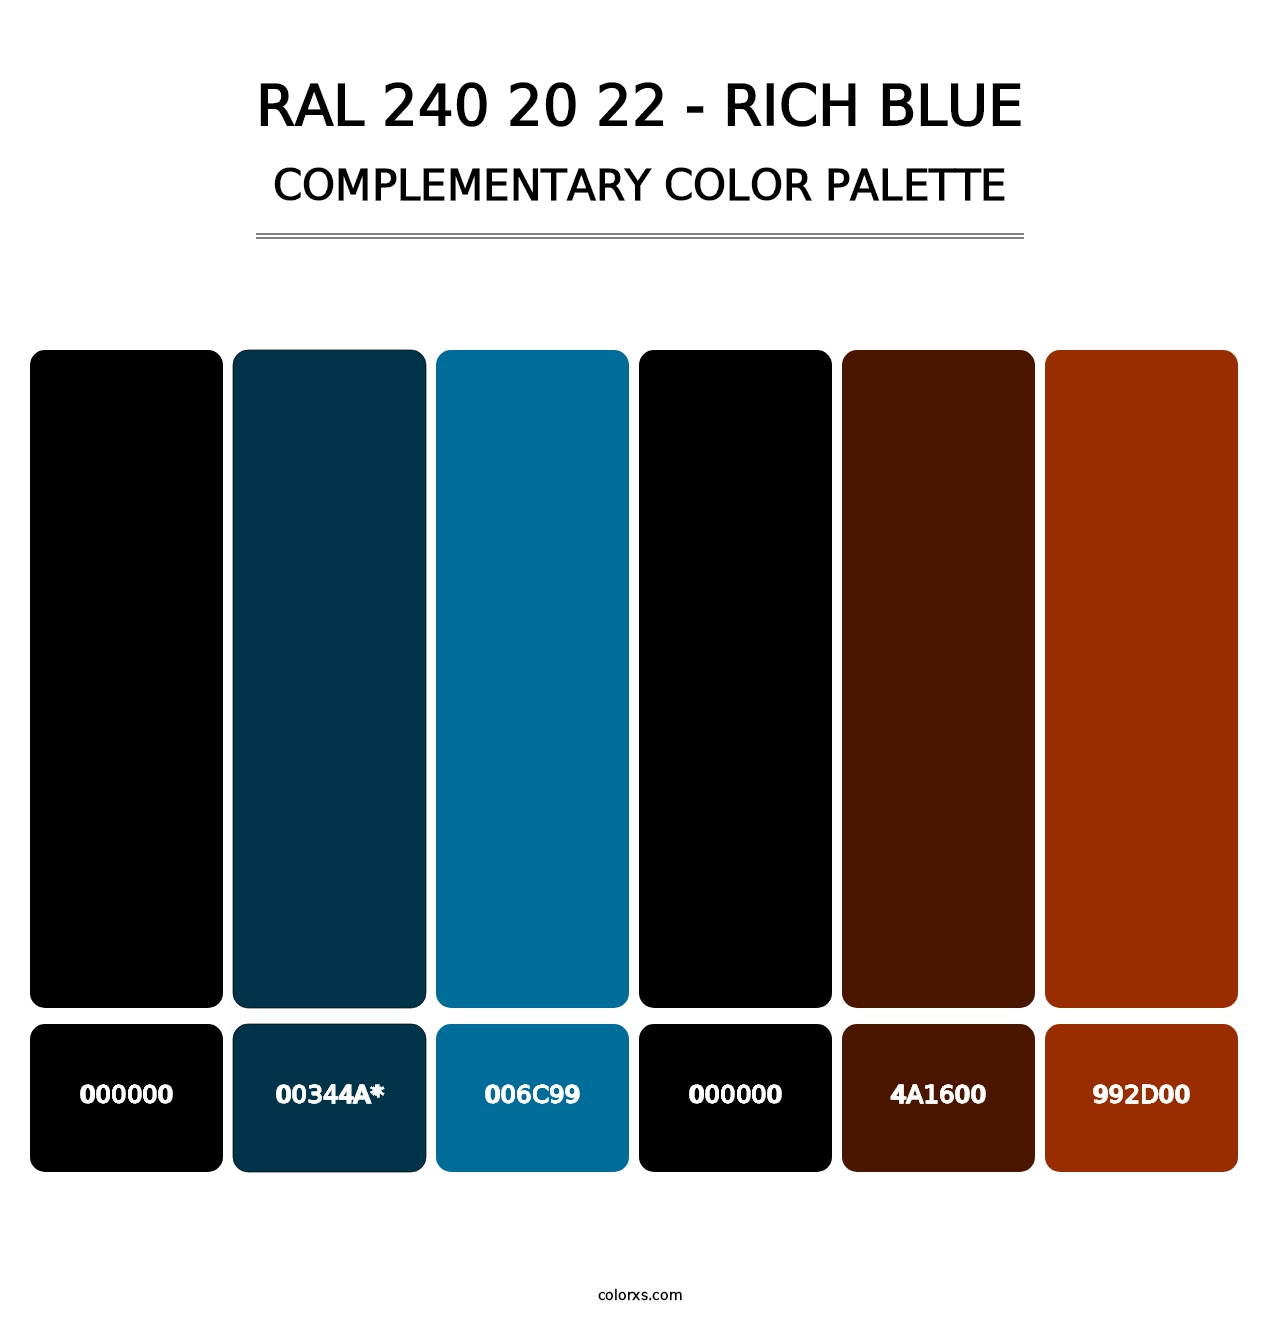 RAL 240 20 22 - Rich Blue - Complementary Color Palette